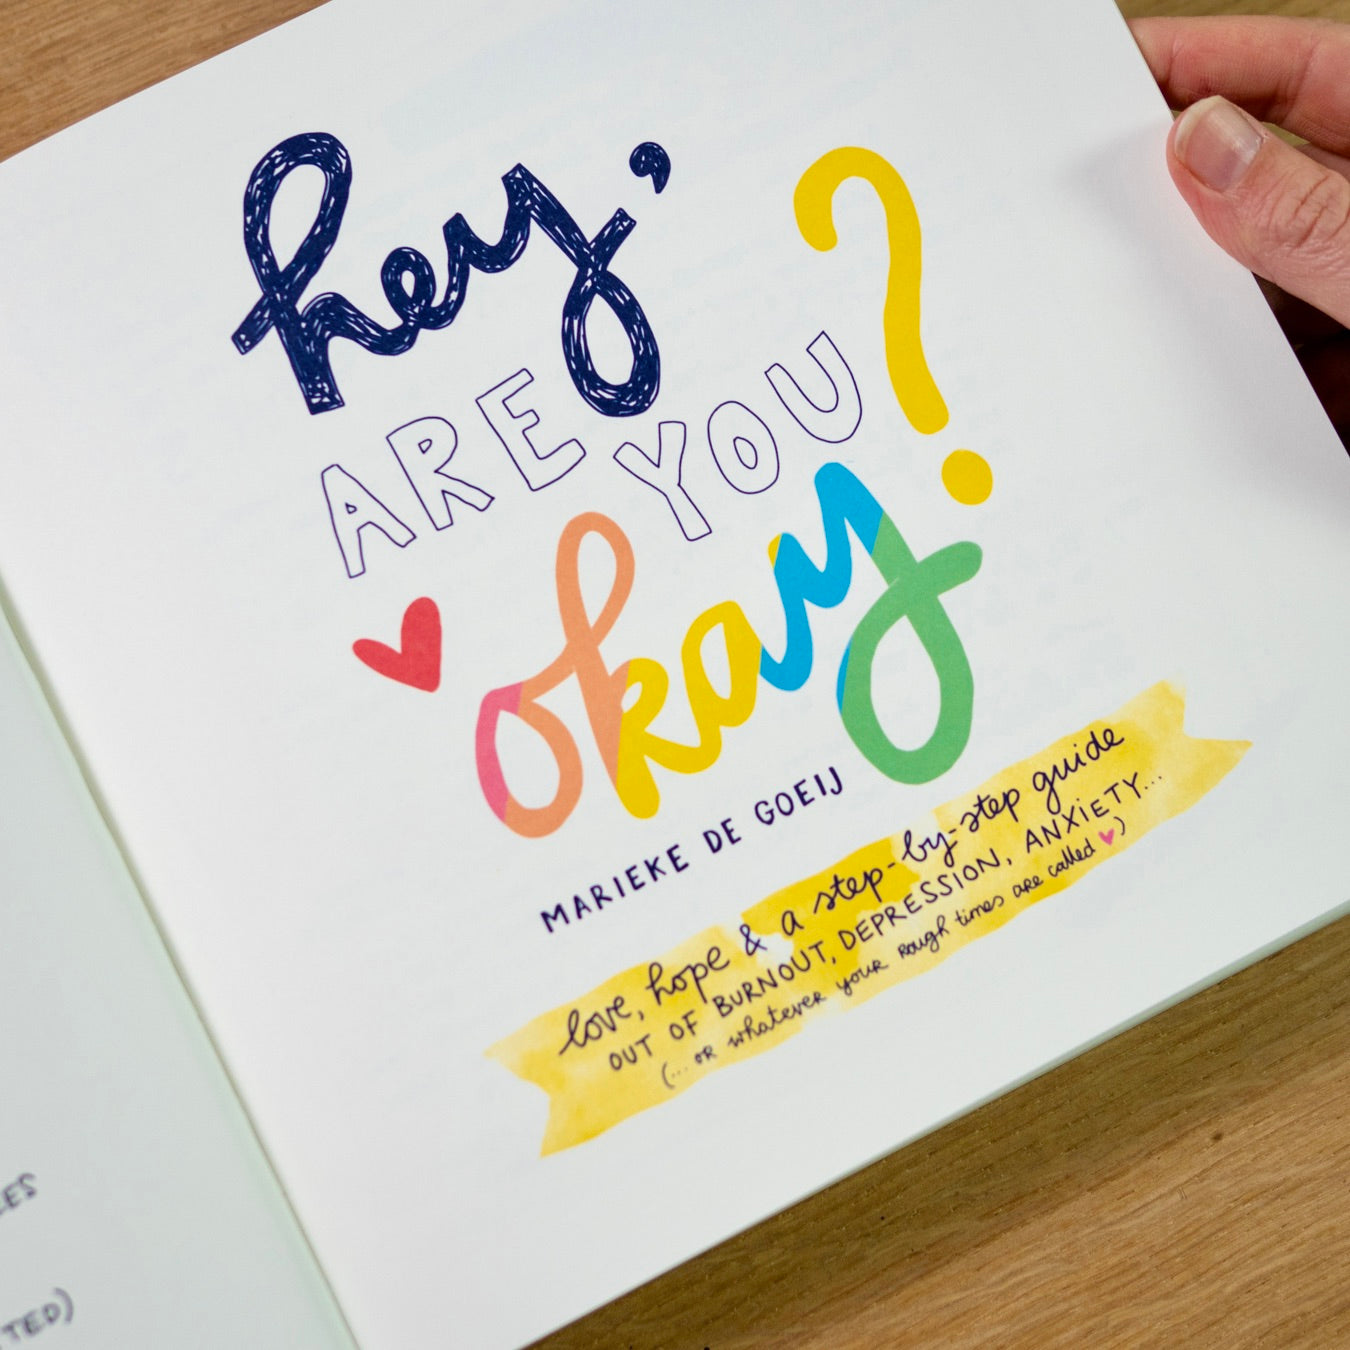 'Hey Are You Okay' - the book